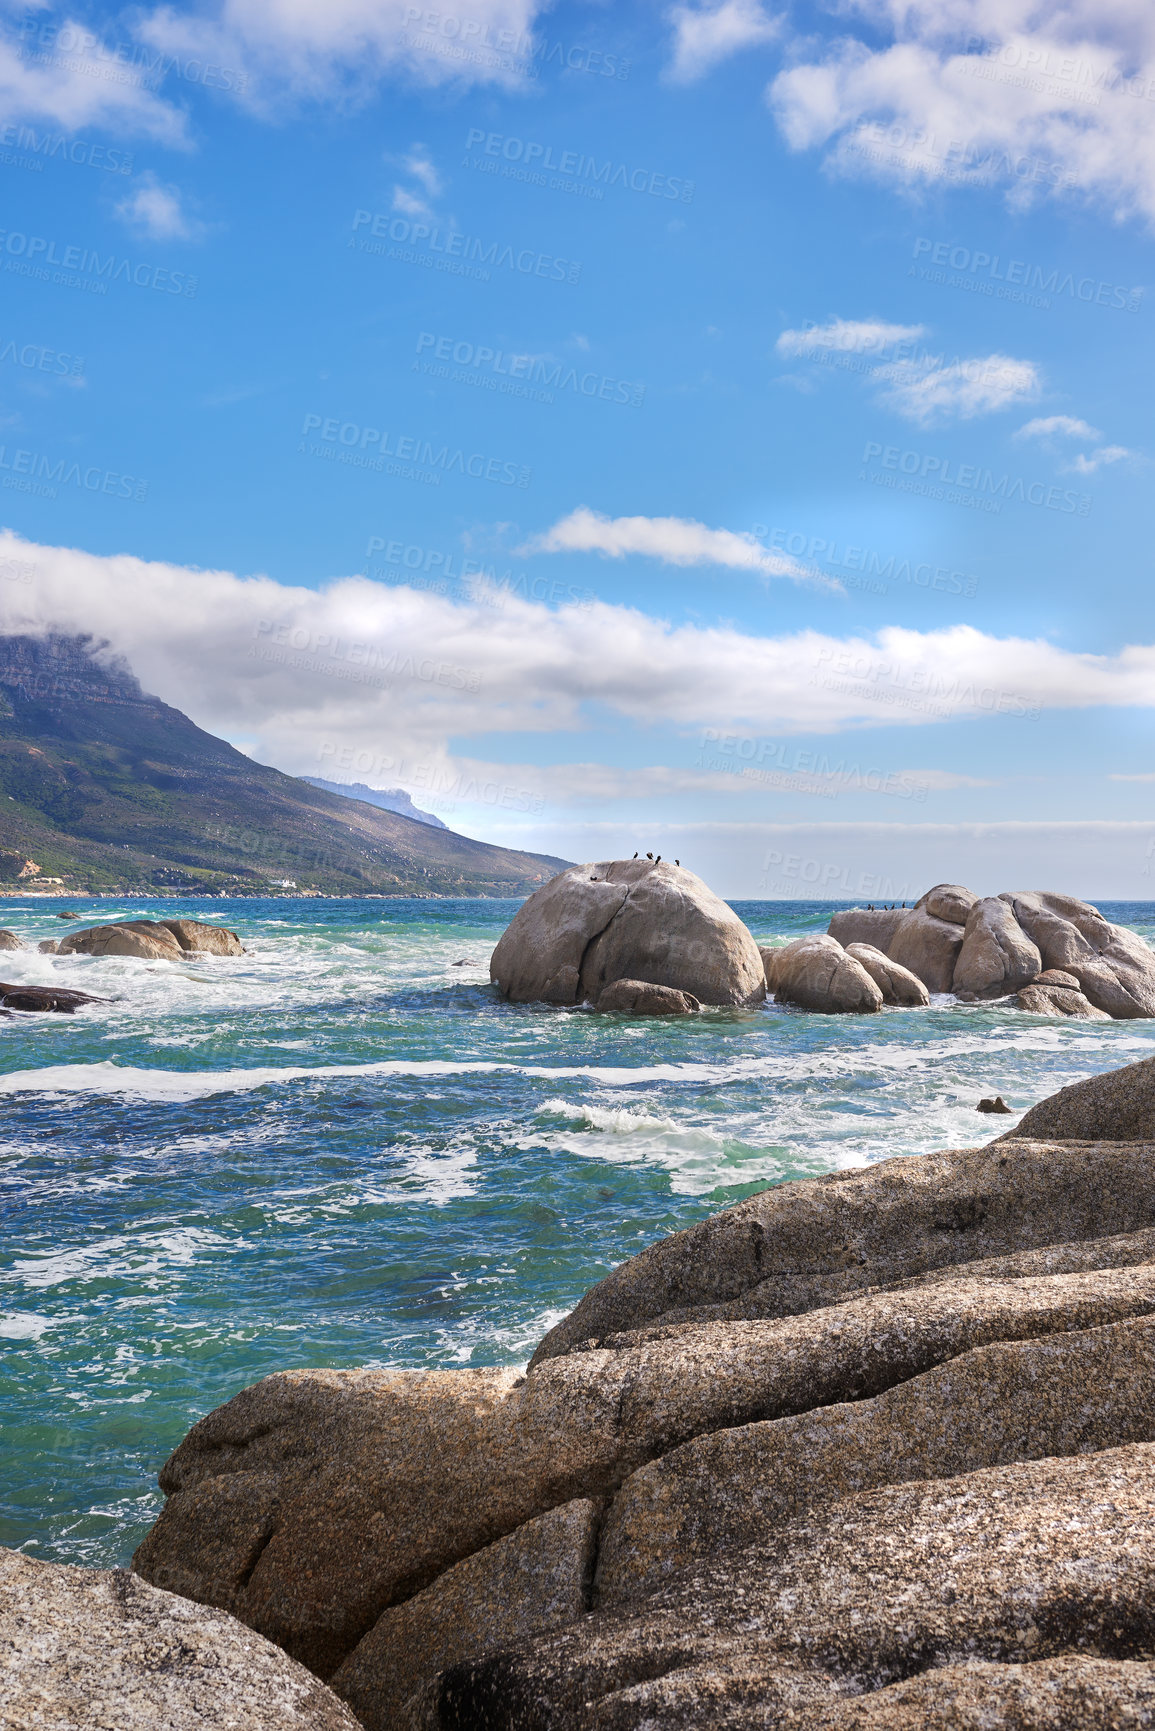 Buy stock photo Landscape view of sea water, rocks and a blue sky with copy space in Camps Bay Beach, Cape Town, South Africa. Calm, serene, tranquil, ocean and relaxing nature scenery. Waves washing on rocky shore